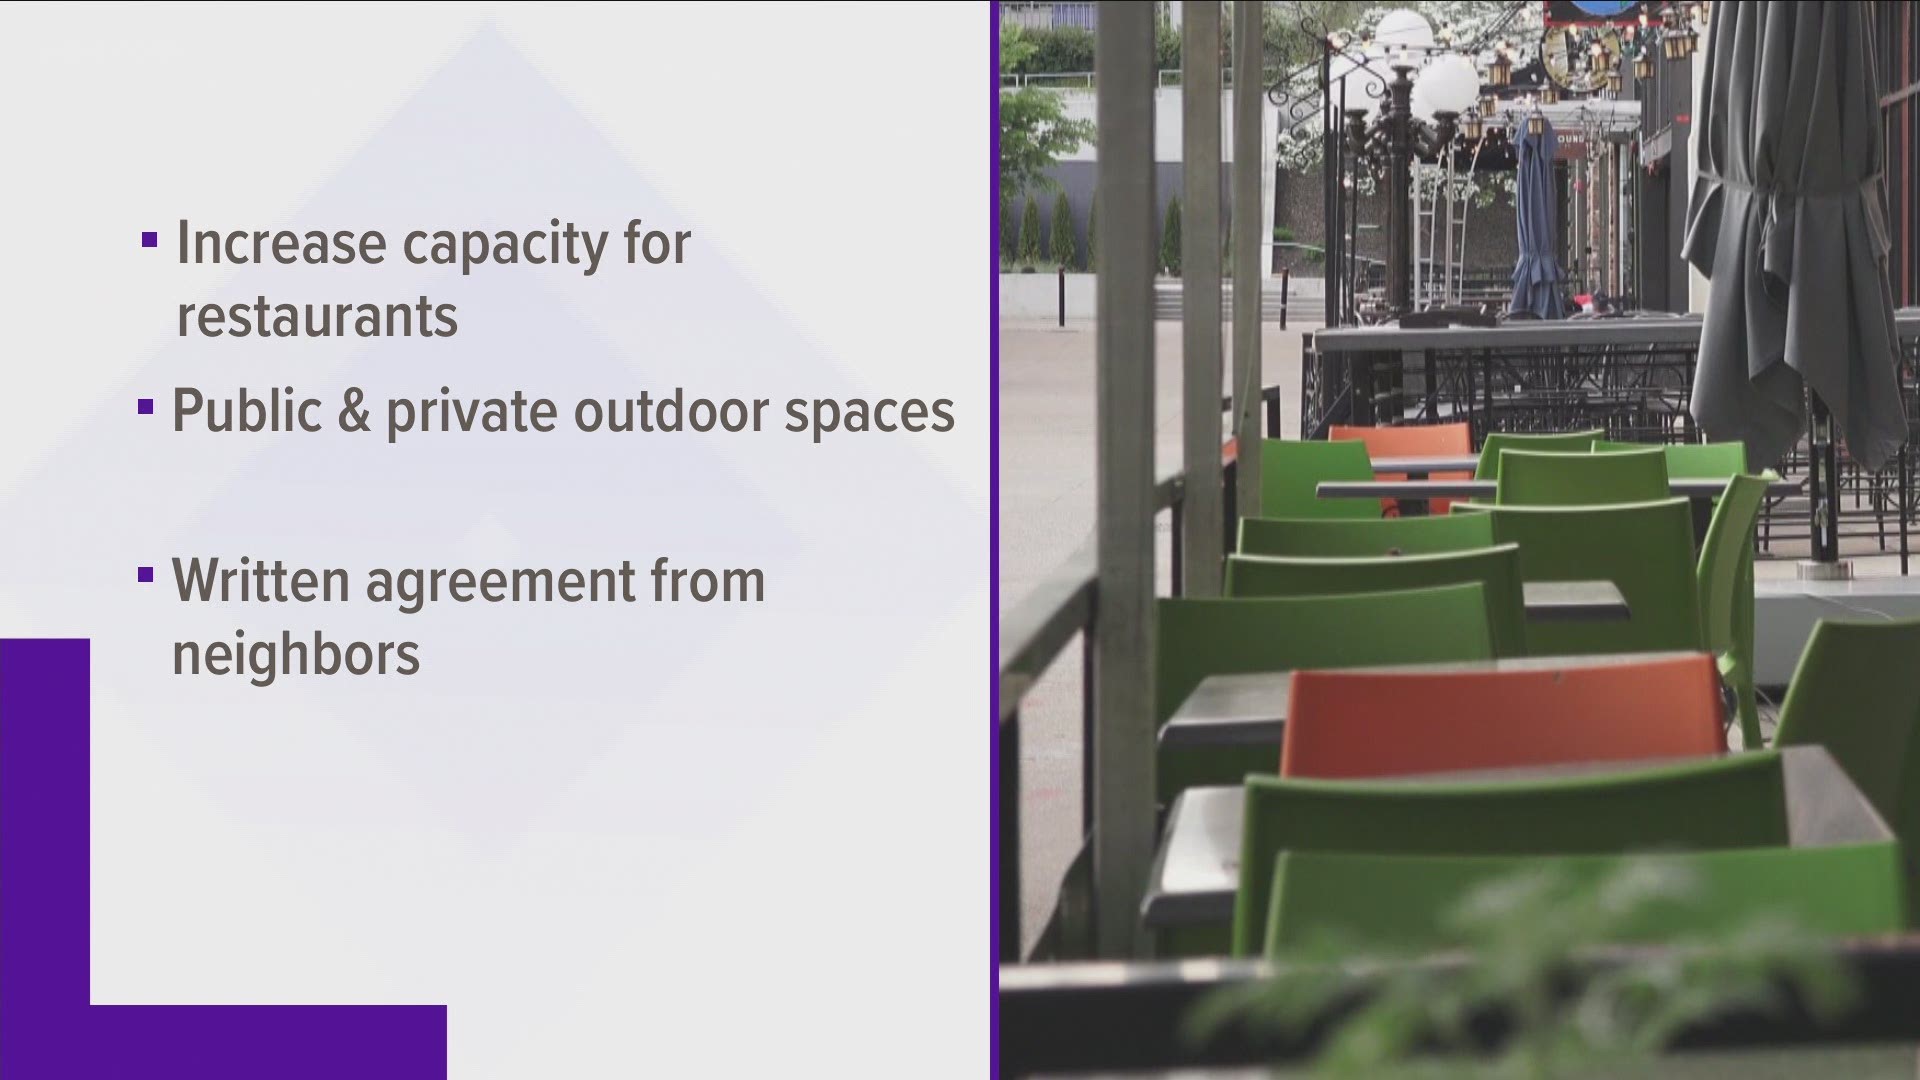 The permits will allow restaurants to expand outdoor seating to parking spots and other private/public outdoor spaces.